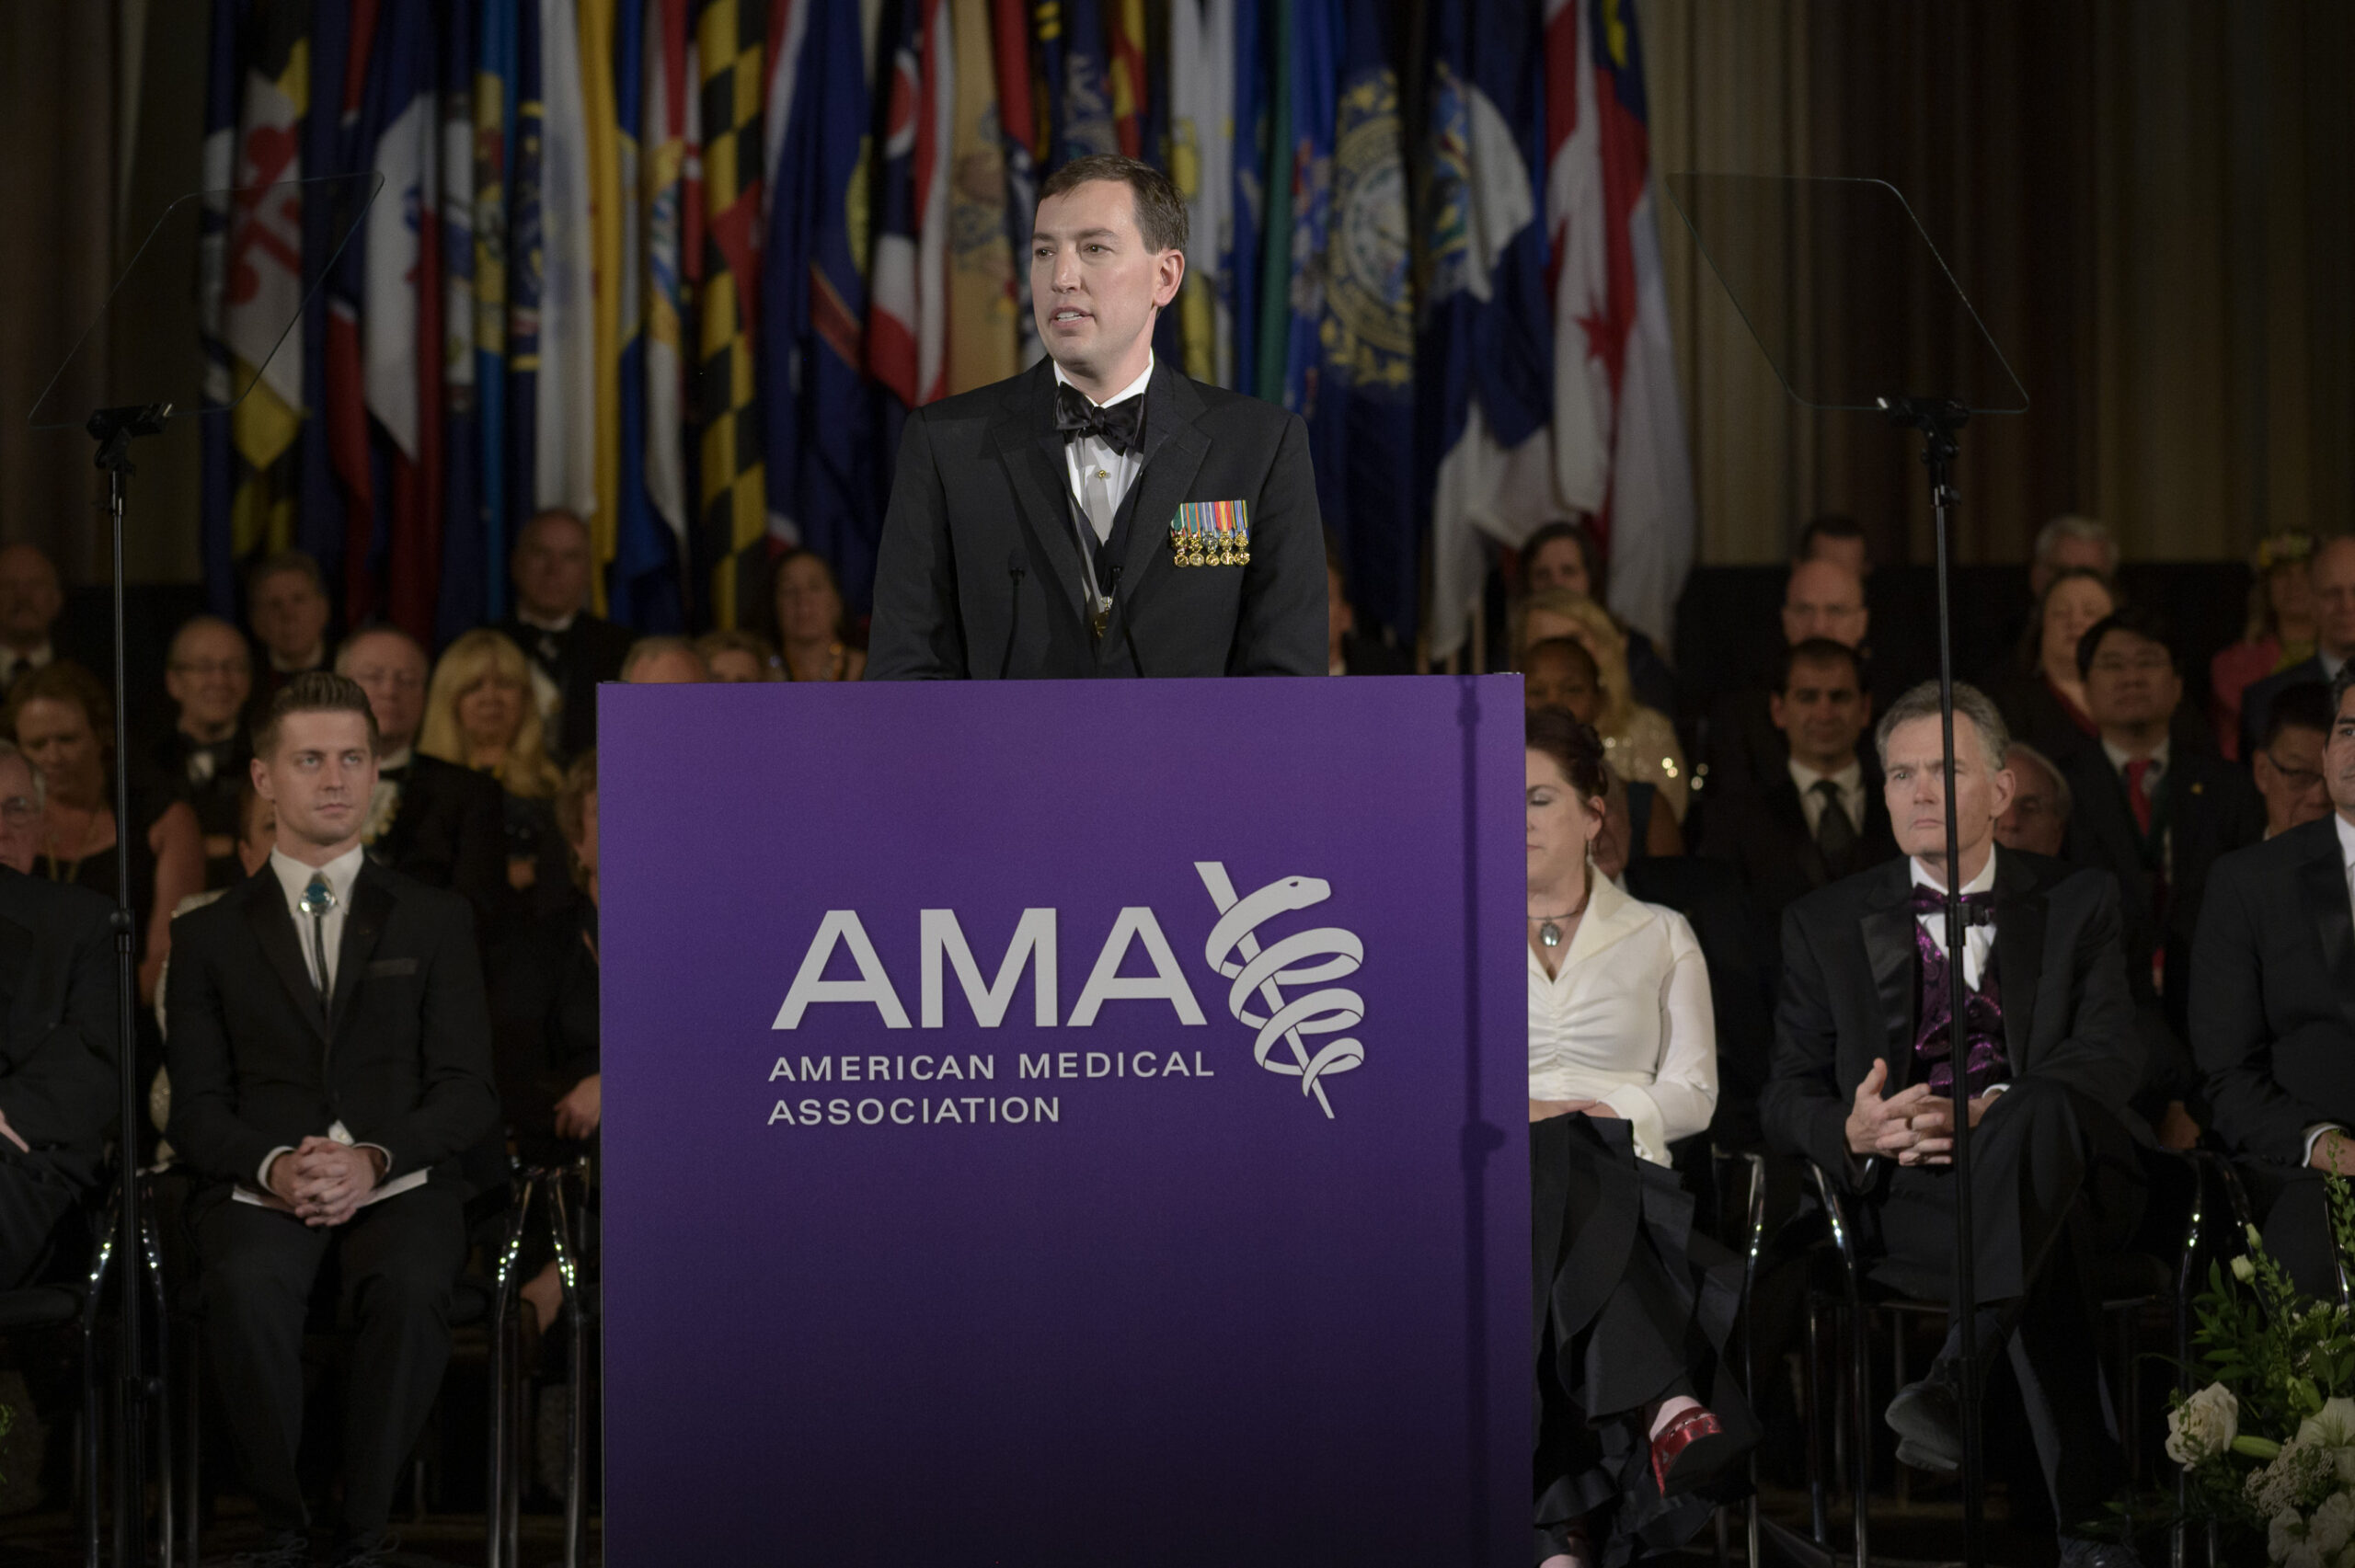 A man speaks on stage at an American Medical Association event